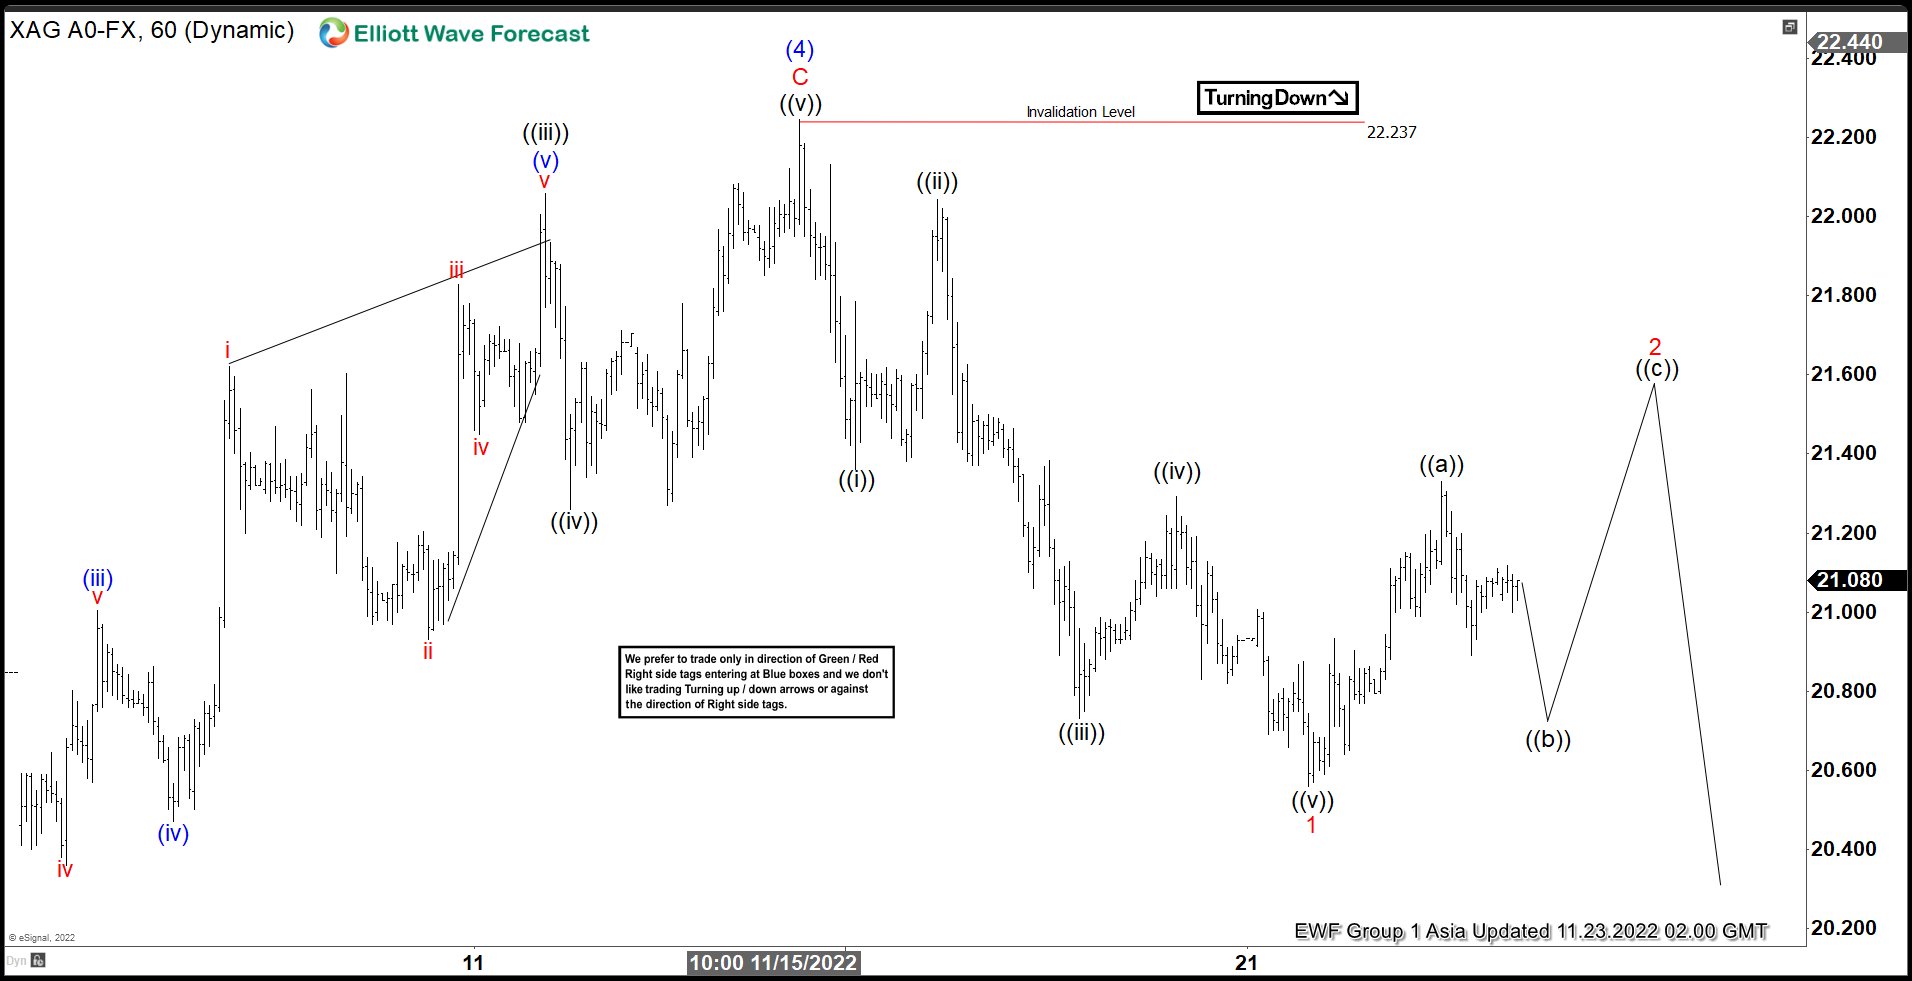 Elliott Wave View: Silver (XAGUSD) 5 Waves Down Suggests Further Downside